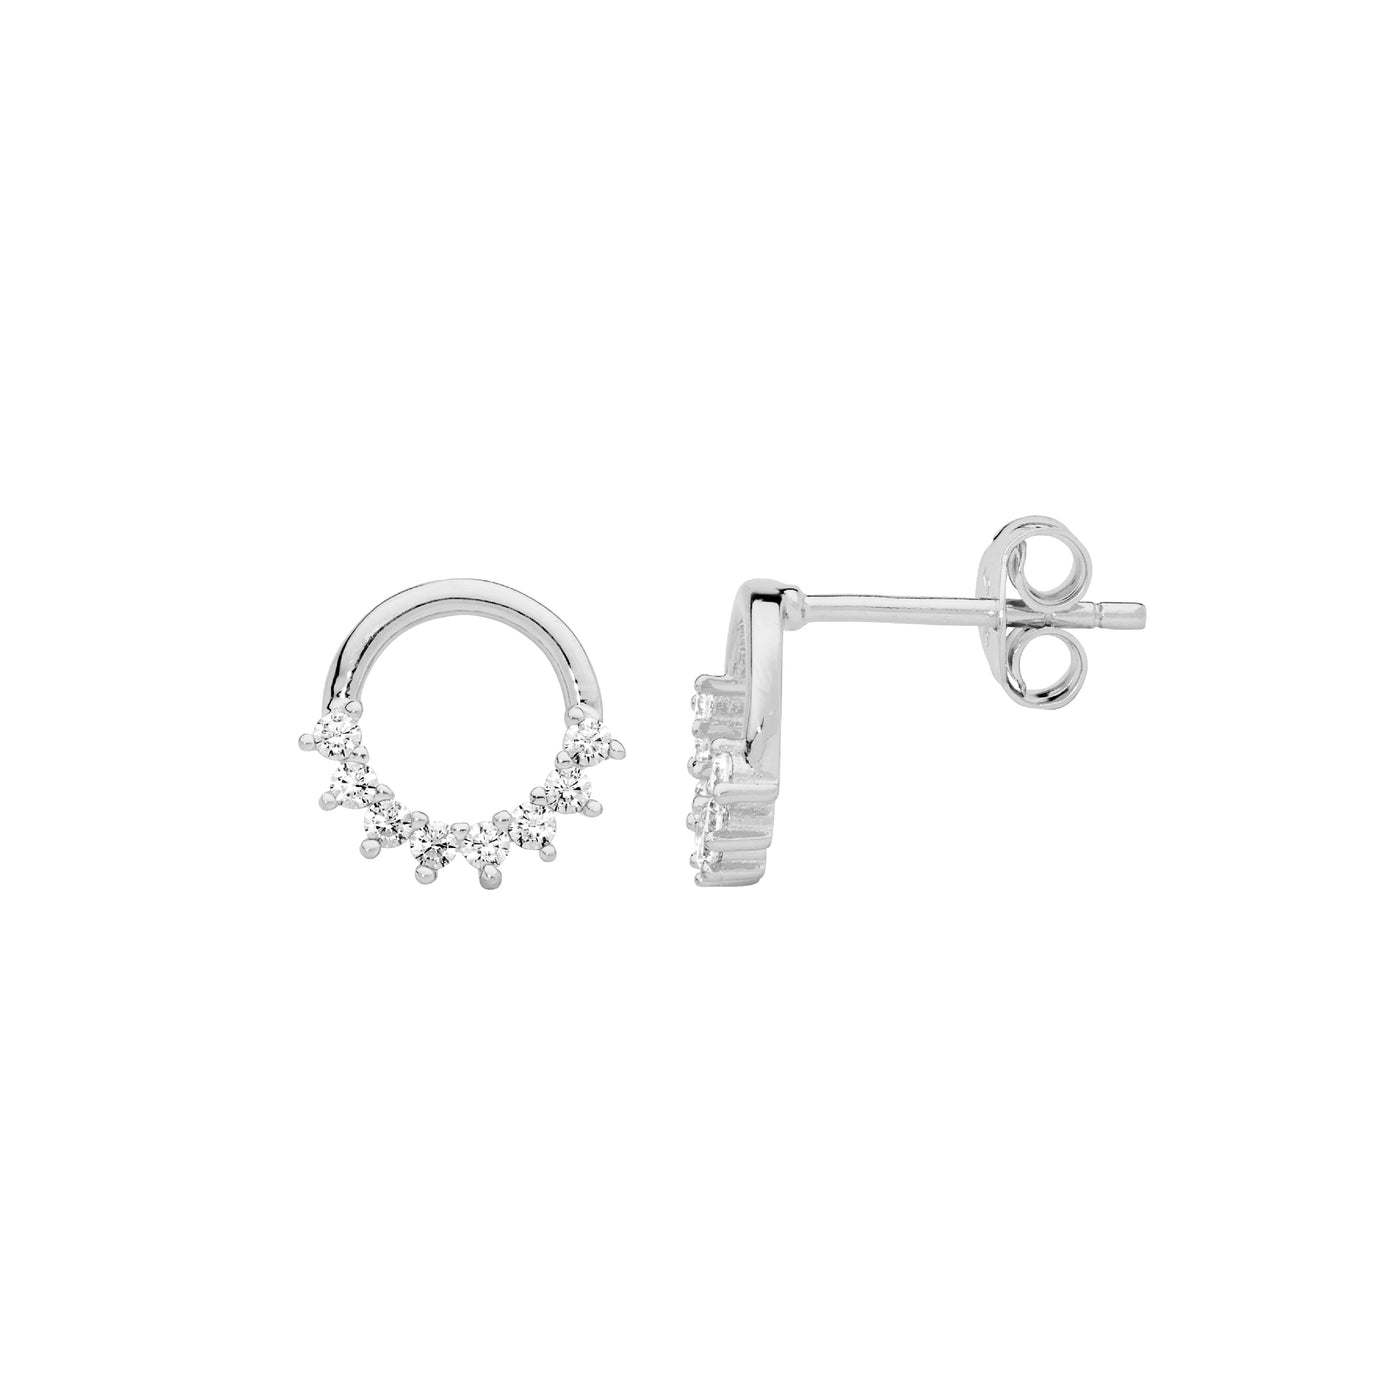 Sterling silver open circle earrings set with cz